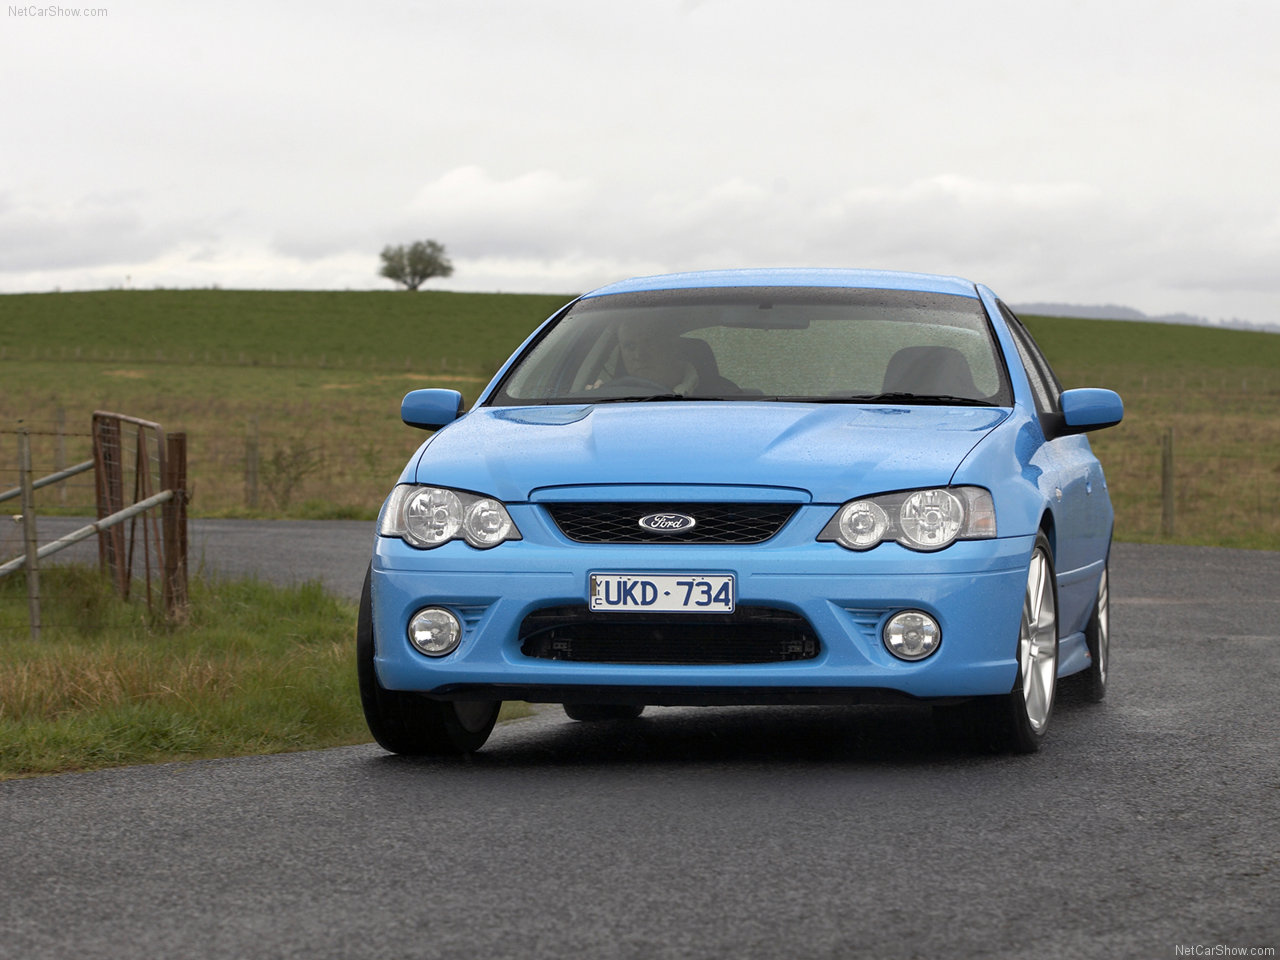 Ford - Populaire français d'automobiles: 2006 Ford BF MkII Falcon XR8